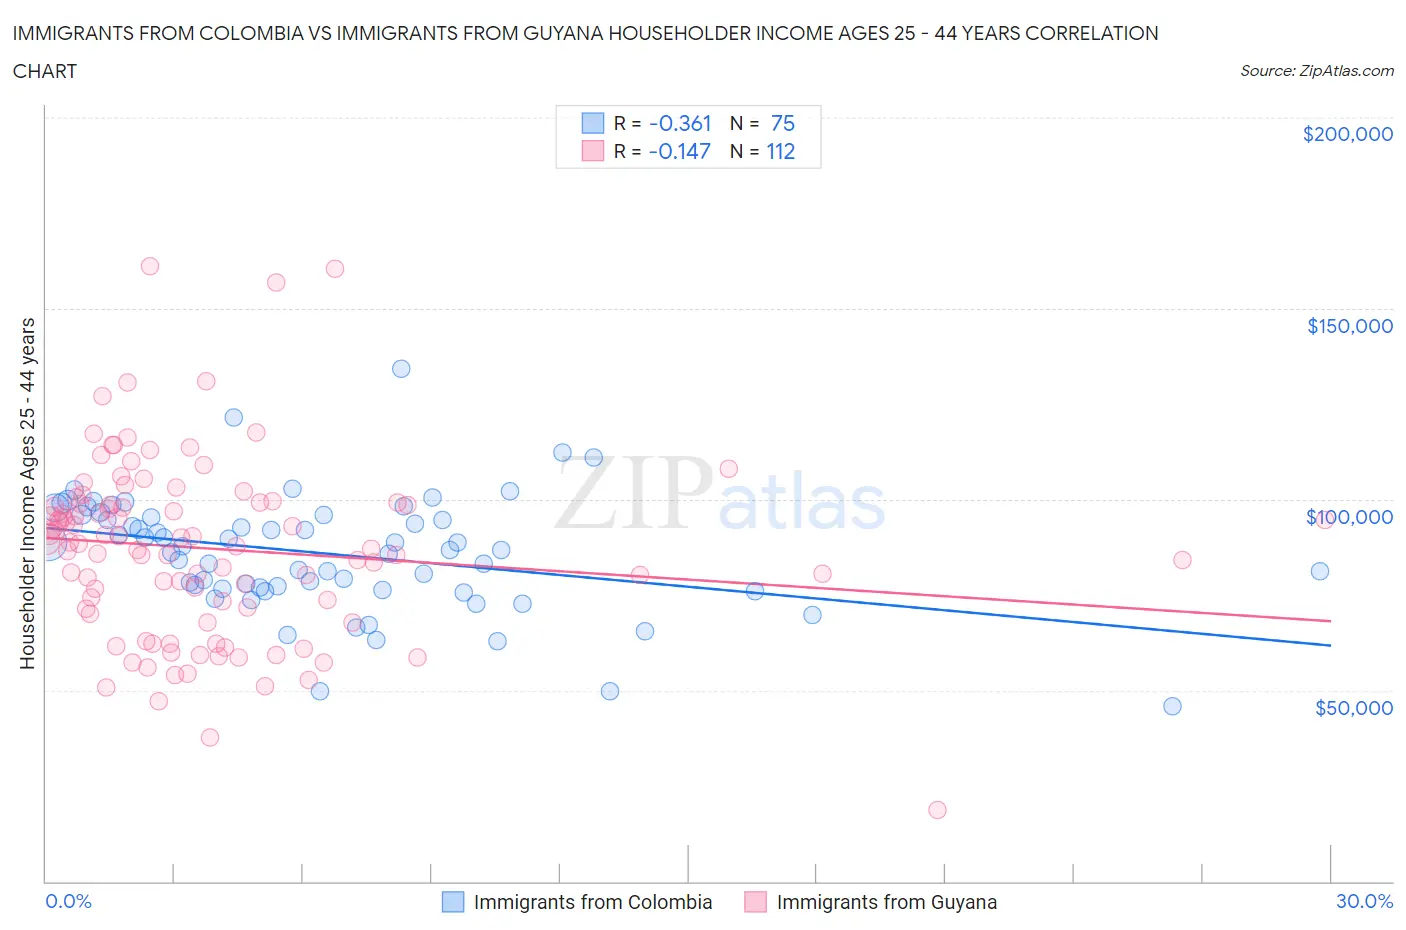 Immigrants from Colombia vs Immigrants from Guyana Householder Income Ages 25 - 44 years